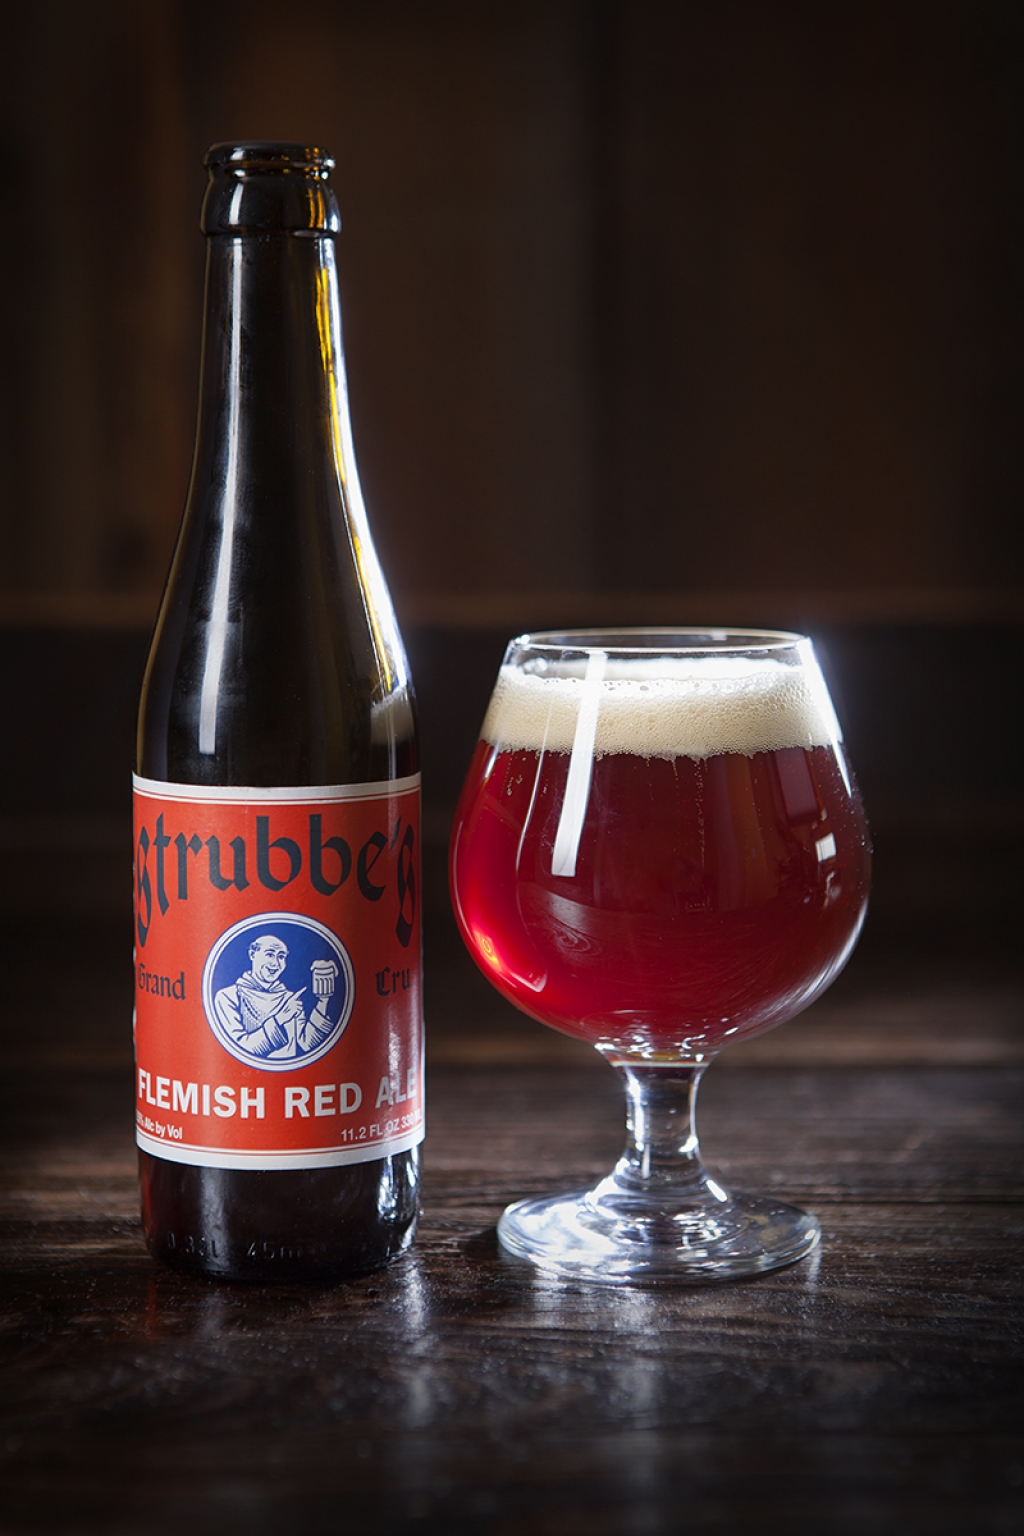 Strubbes Red Ale